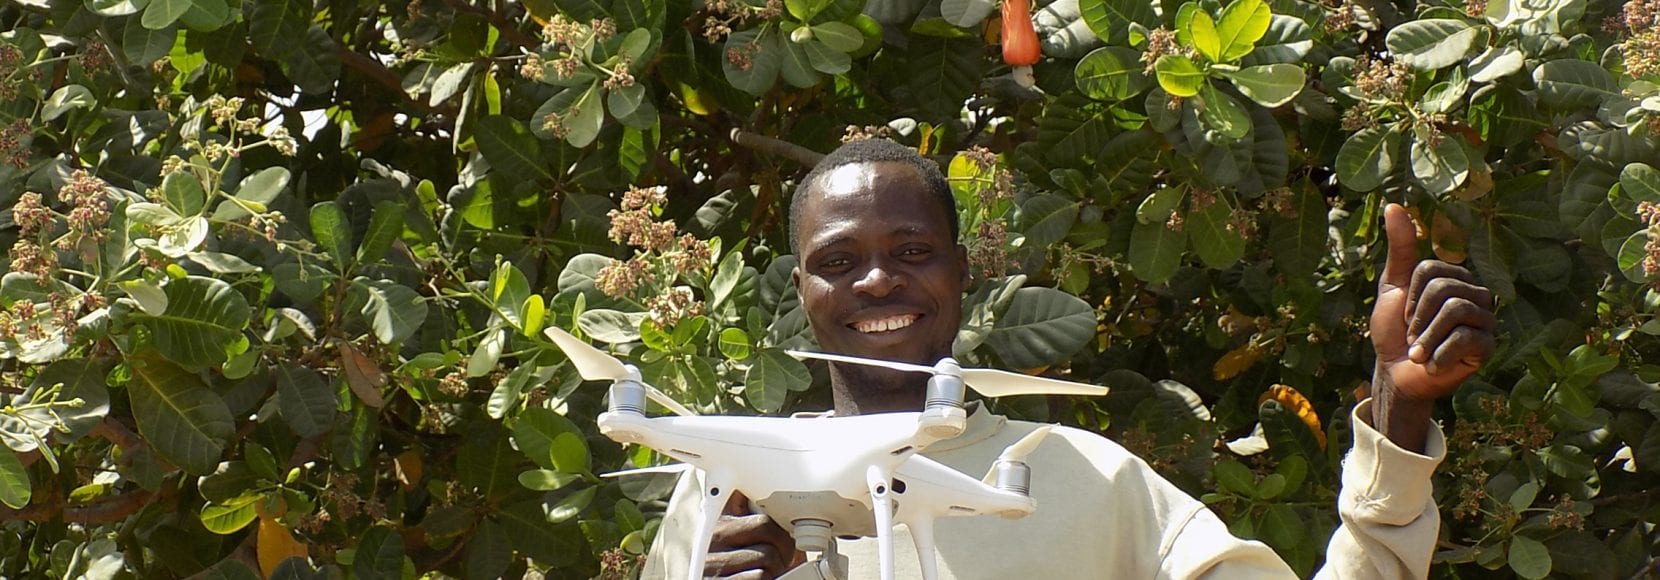 Man smiling holding drone